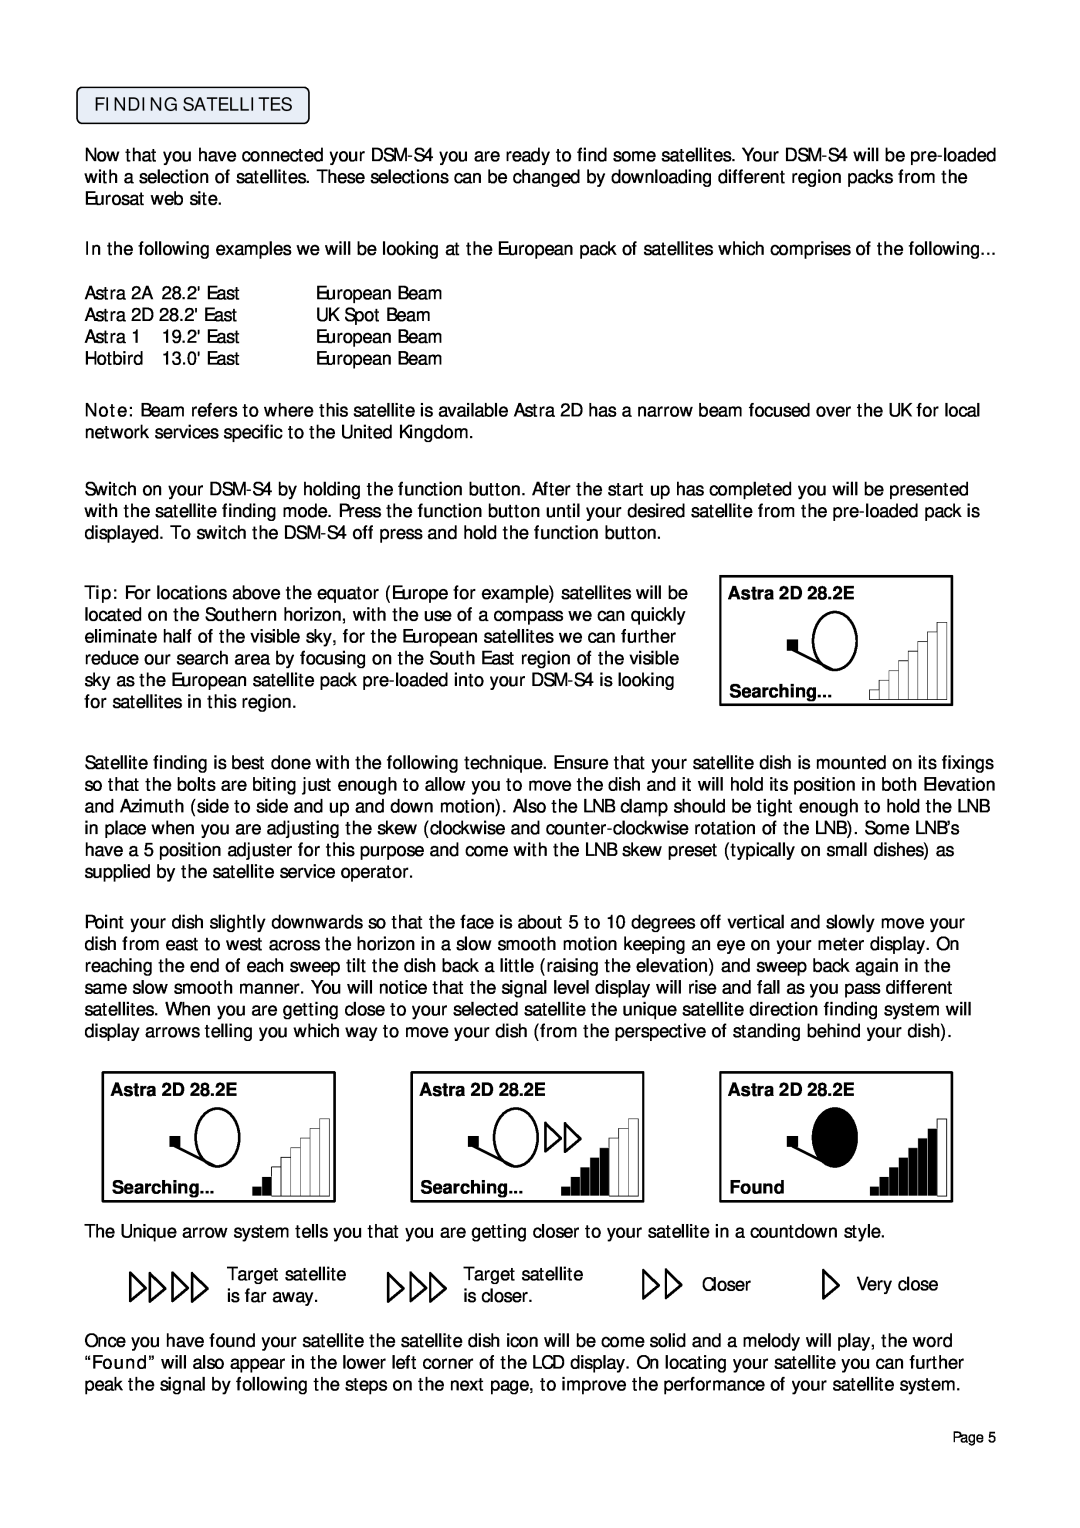 Manhattan Computer Products DSM-4S instruction manual Astra 2D 28.2E Searching, Found 